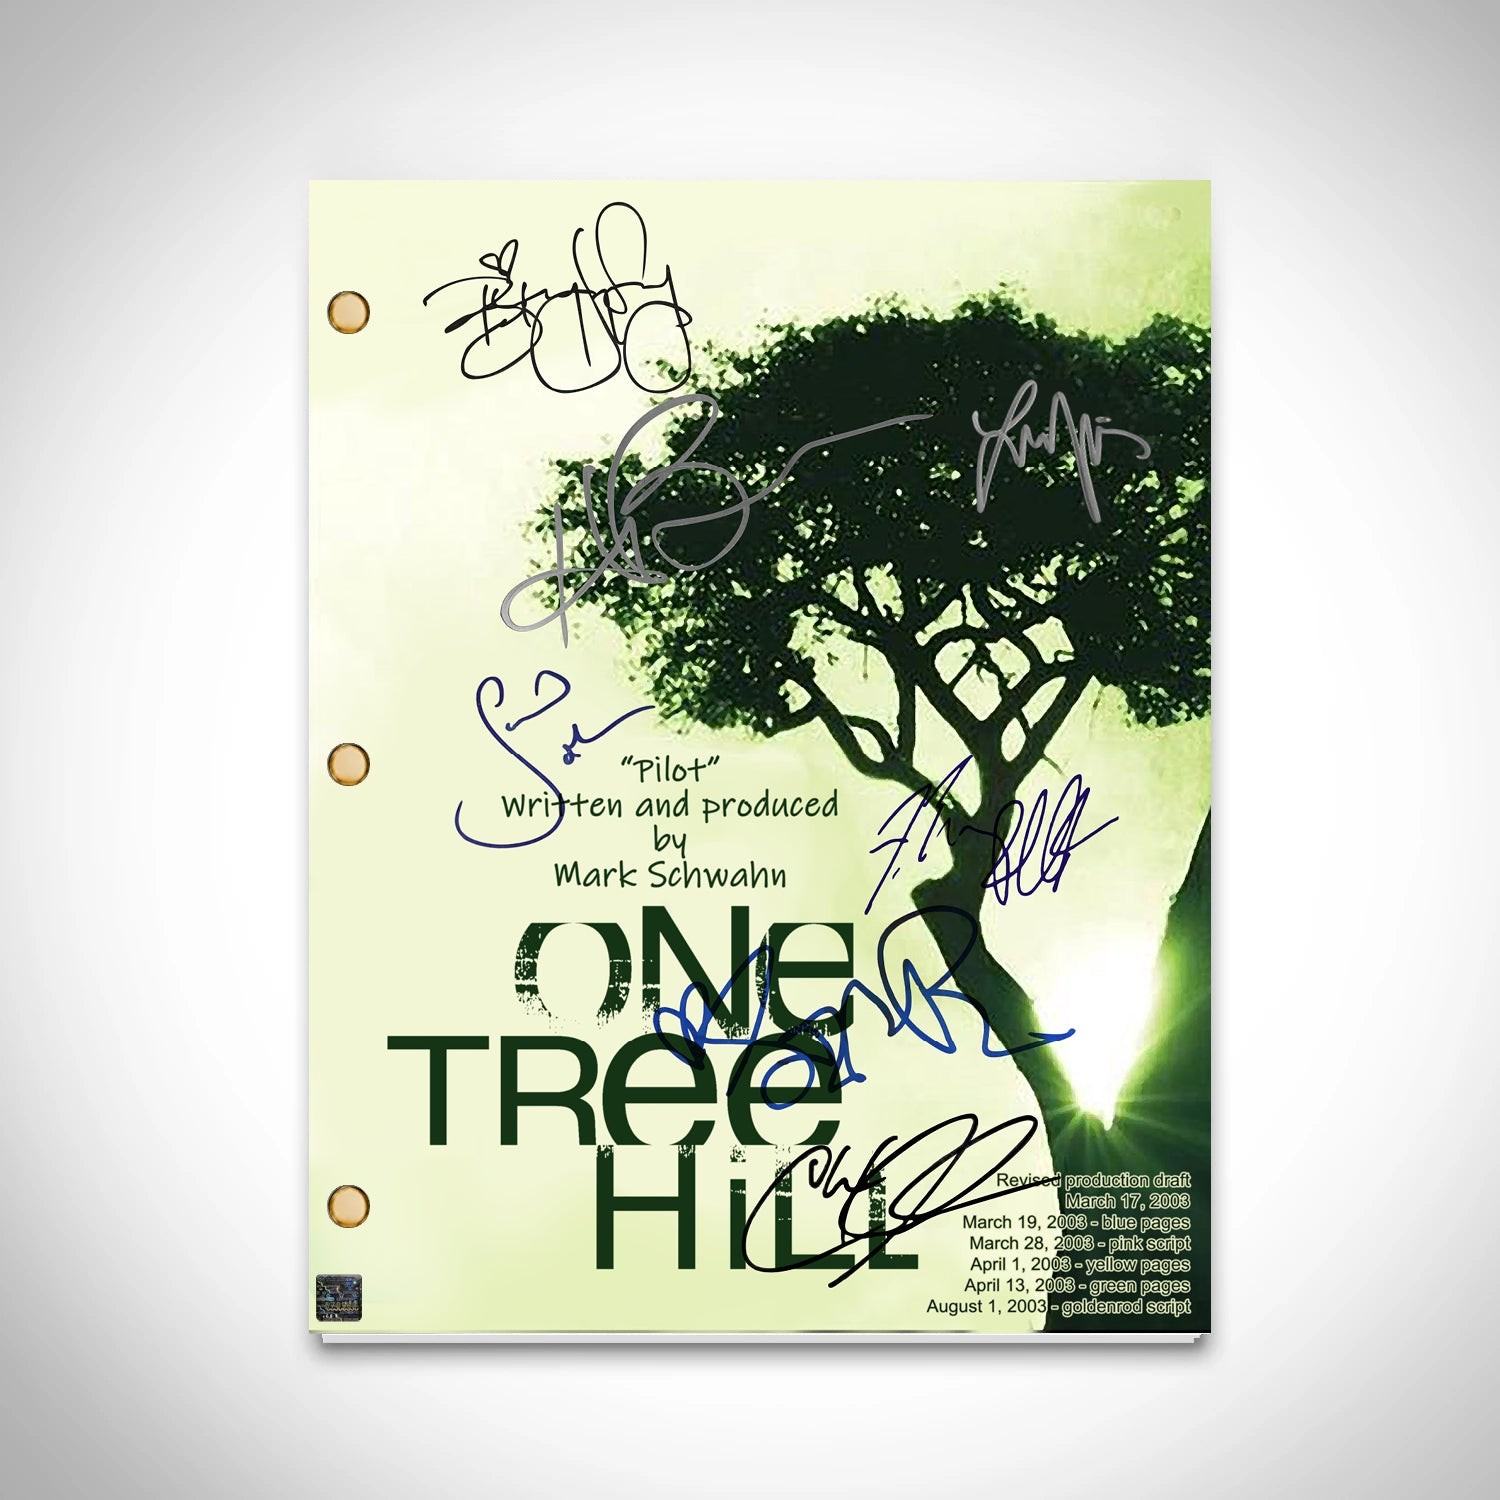 One Tree Hill Signed Script Chad Michael Murray James 